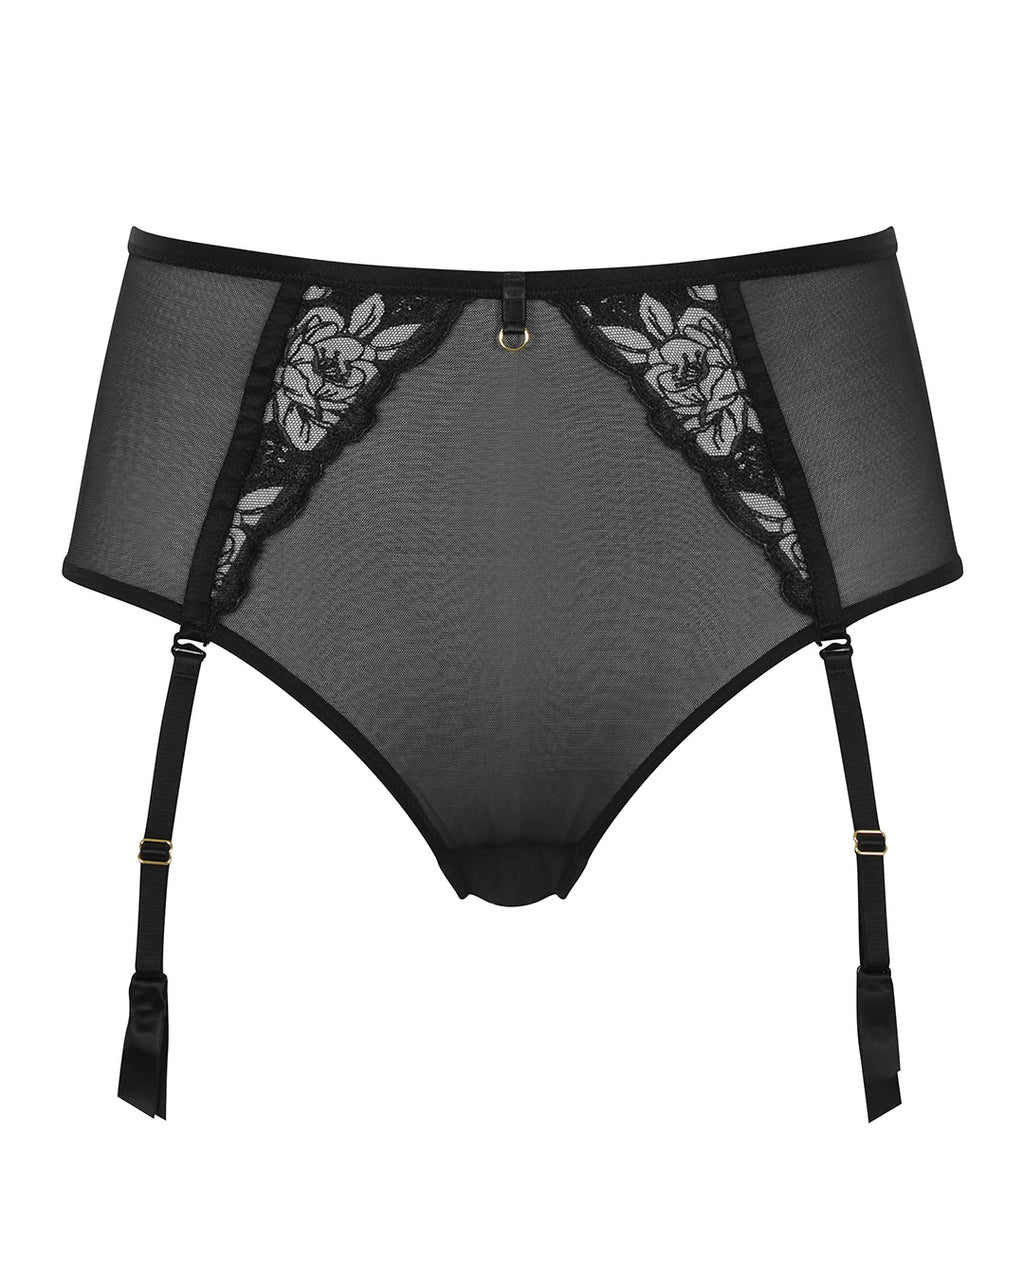 PANACHE – Specialty Fittings Lingerie